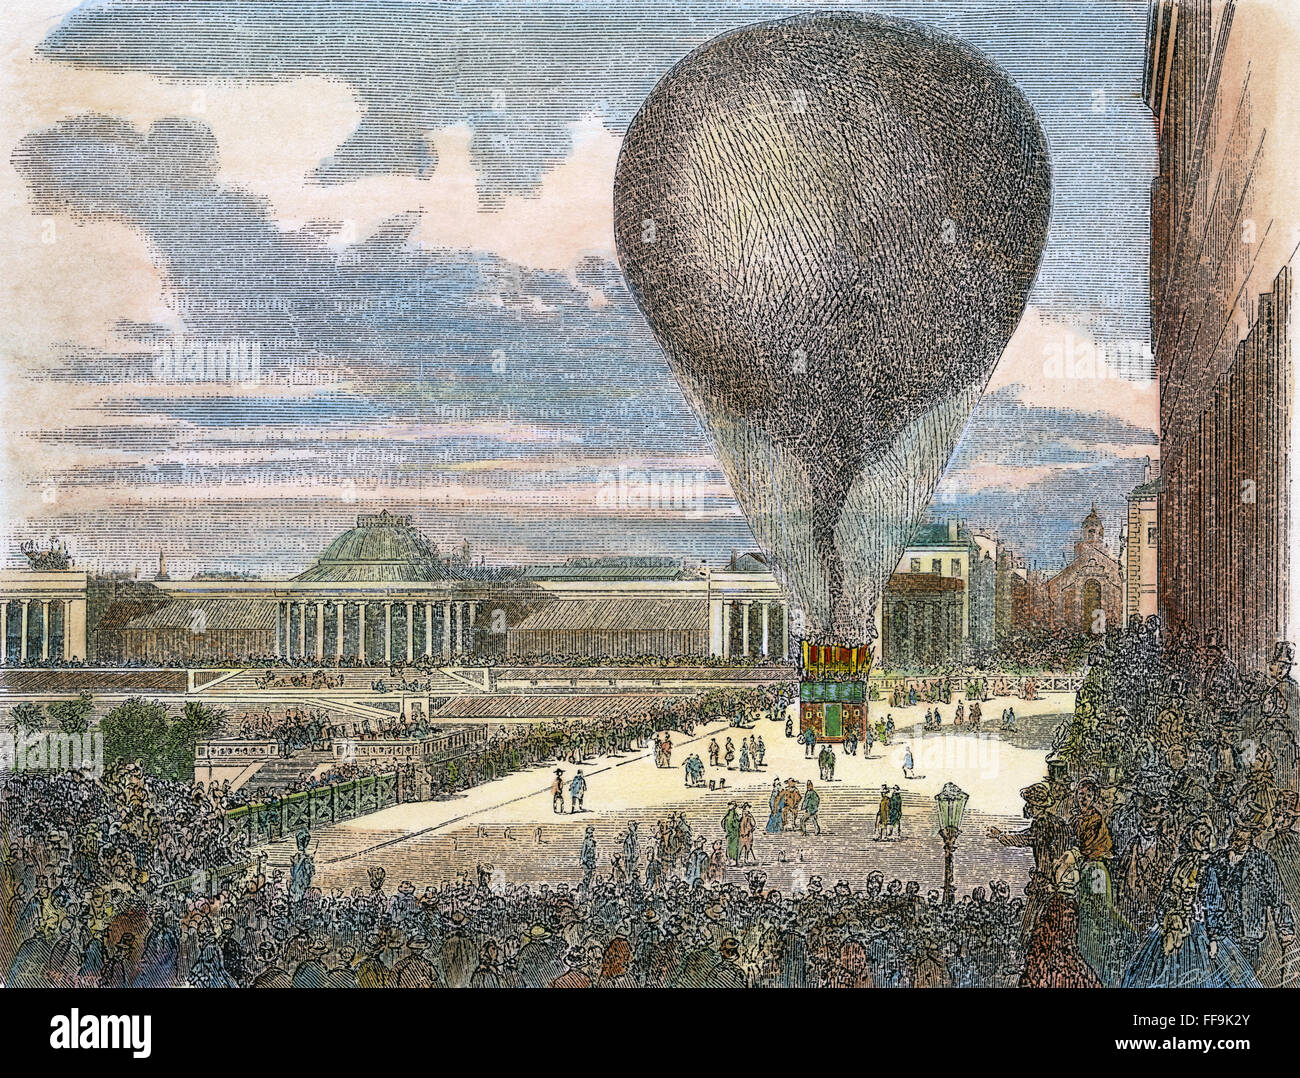 BALLOONING: NADAR, 1864. /nThe ascent of Nadar's 'Le Geant' balloon at Brussels in 1864. Contemporary wood engraving. Stock Photo